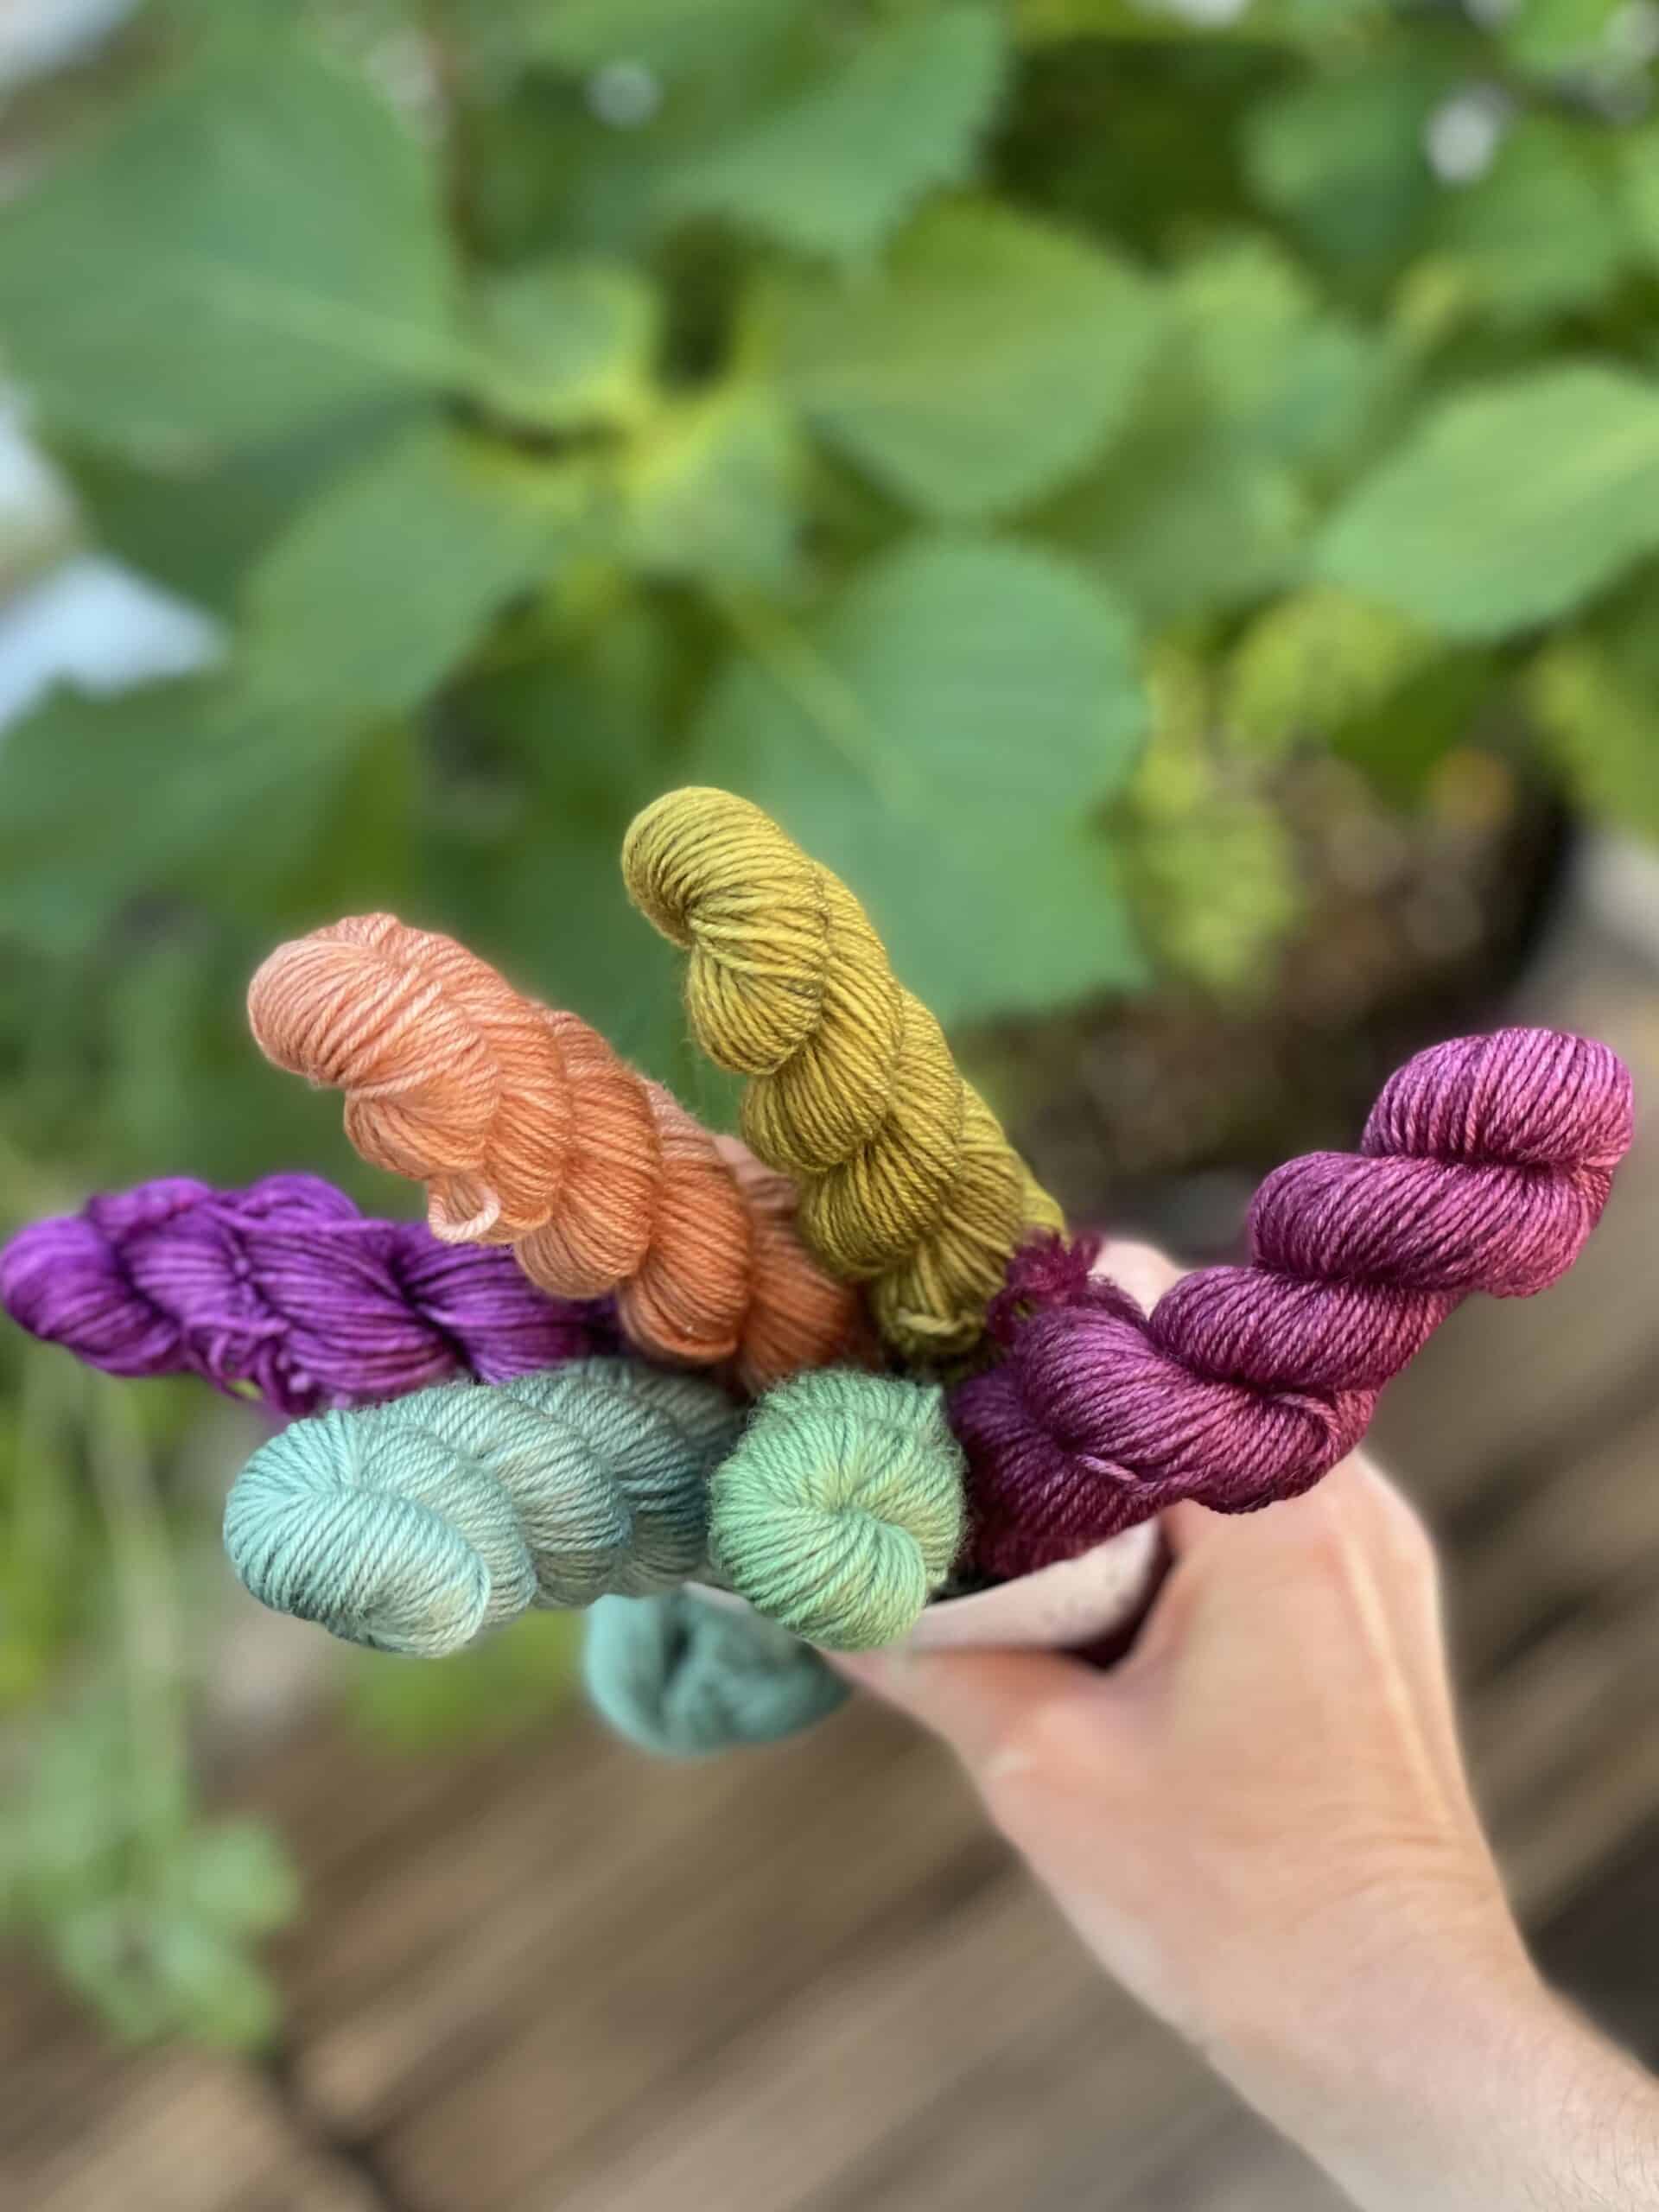 Purple, green, orange and gold mini skeins held in a light-skinned hand.